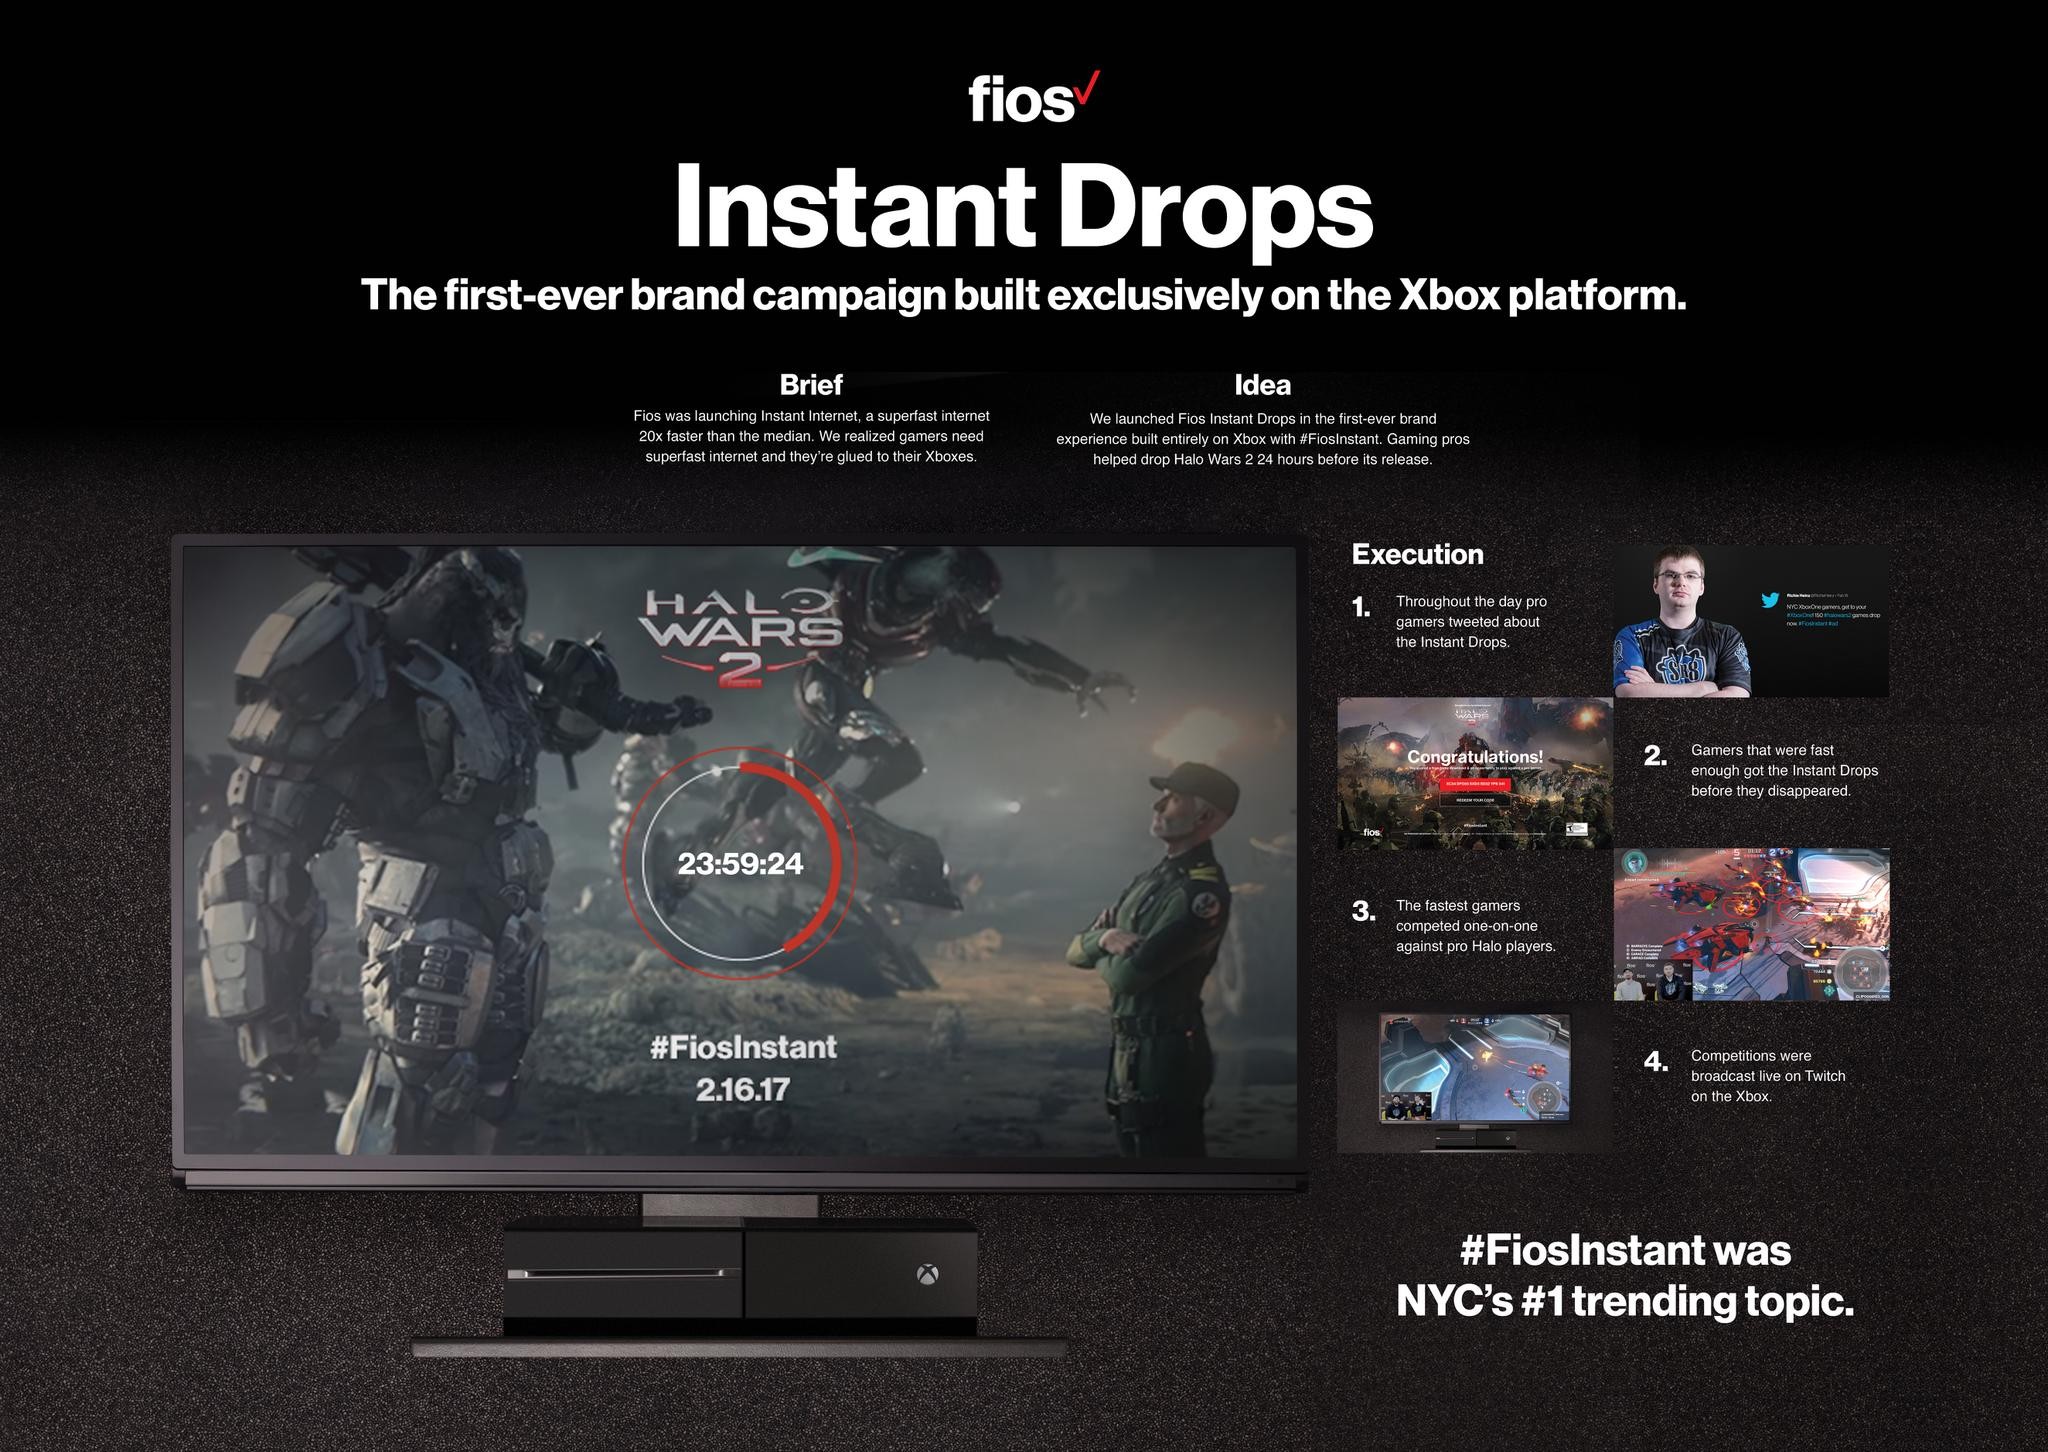 Fios Instant Drops with XBox